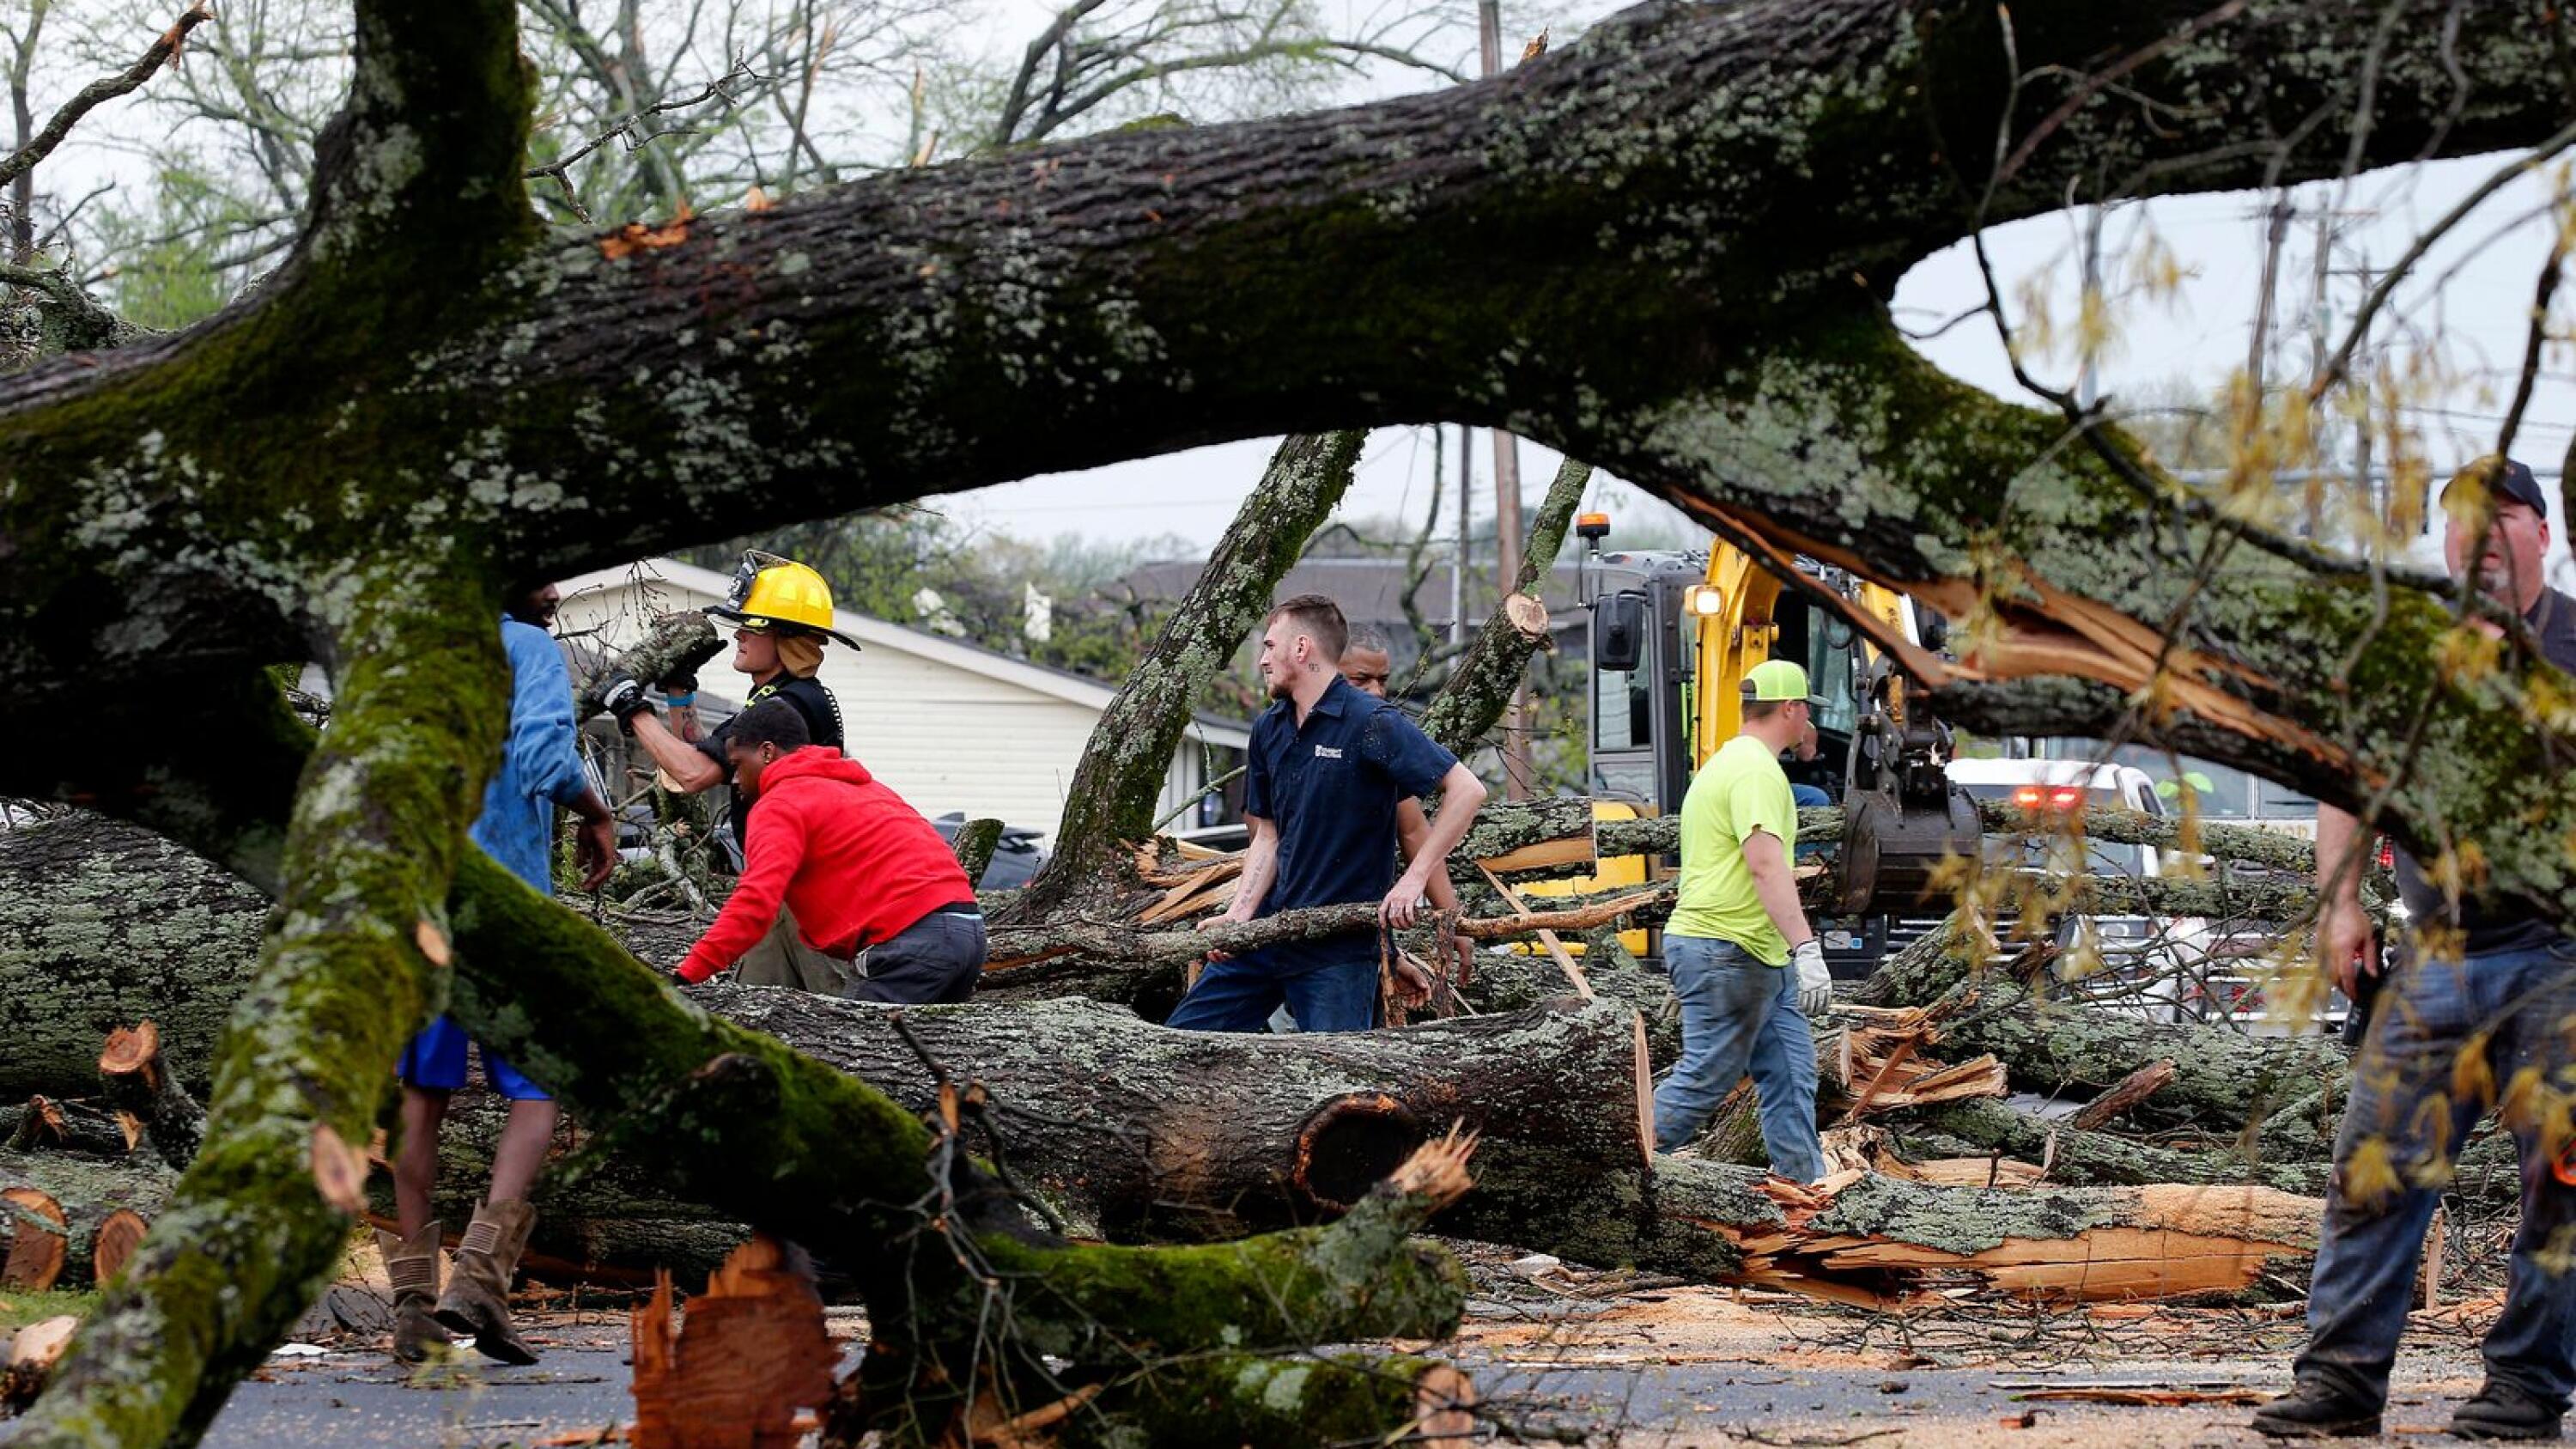 Deadly weather: Tornadoes strike Arkansas, Illinois; theater roof collapses during concert